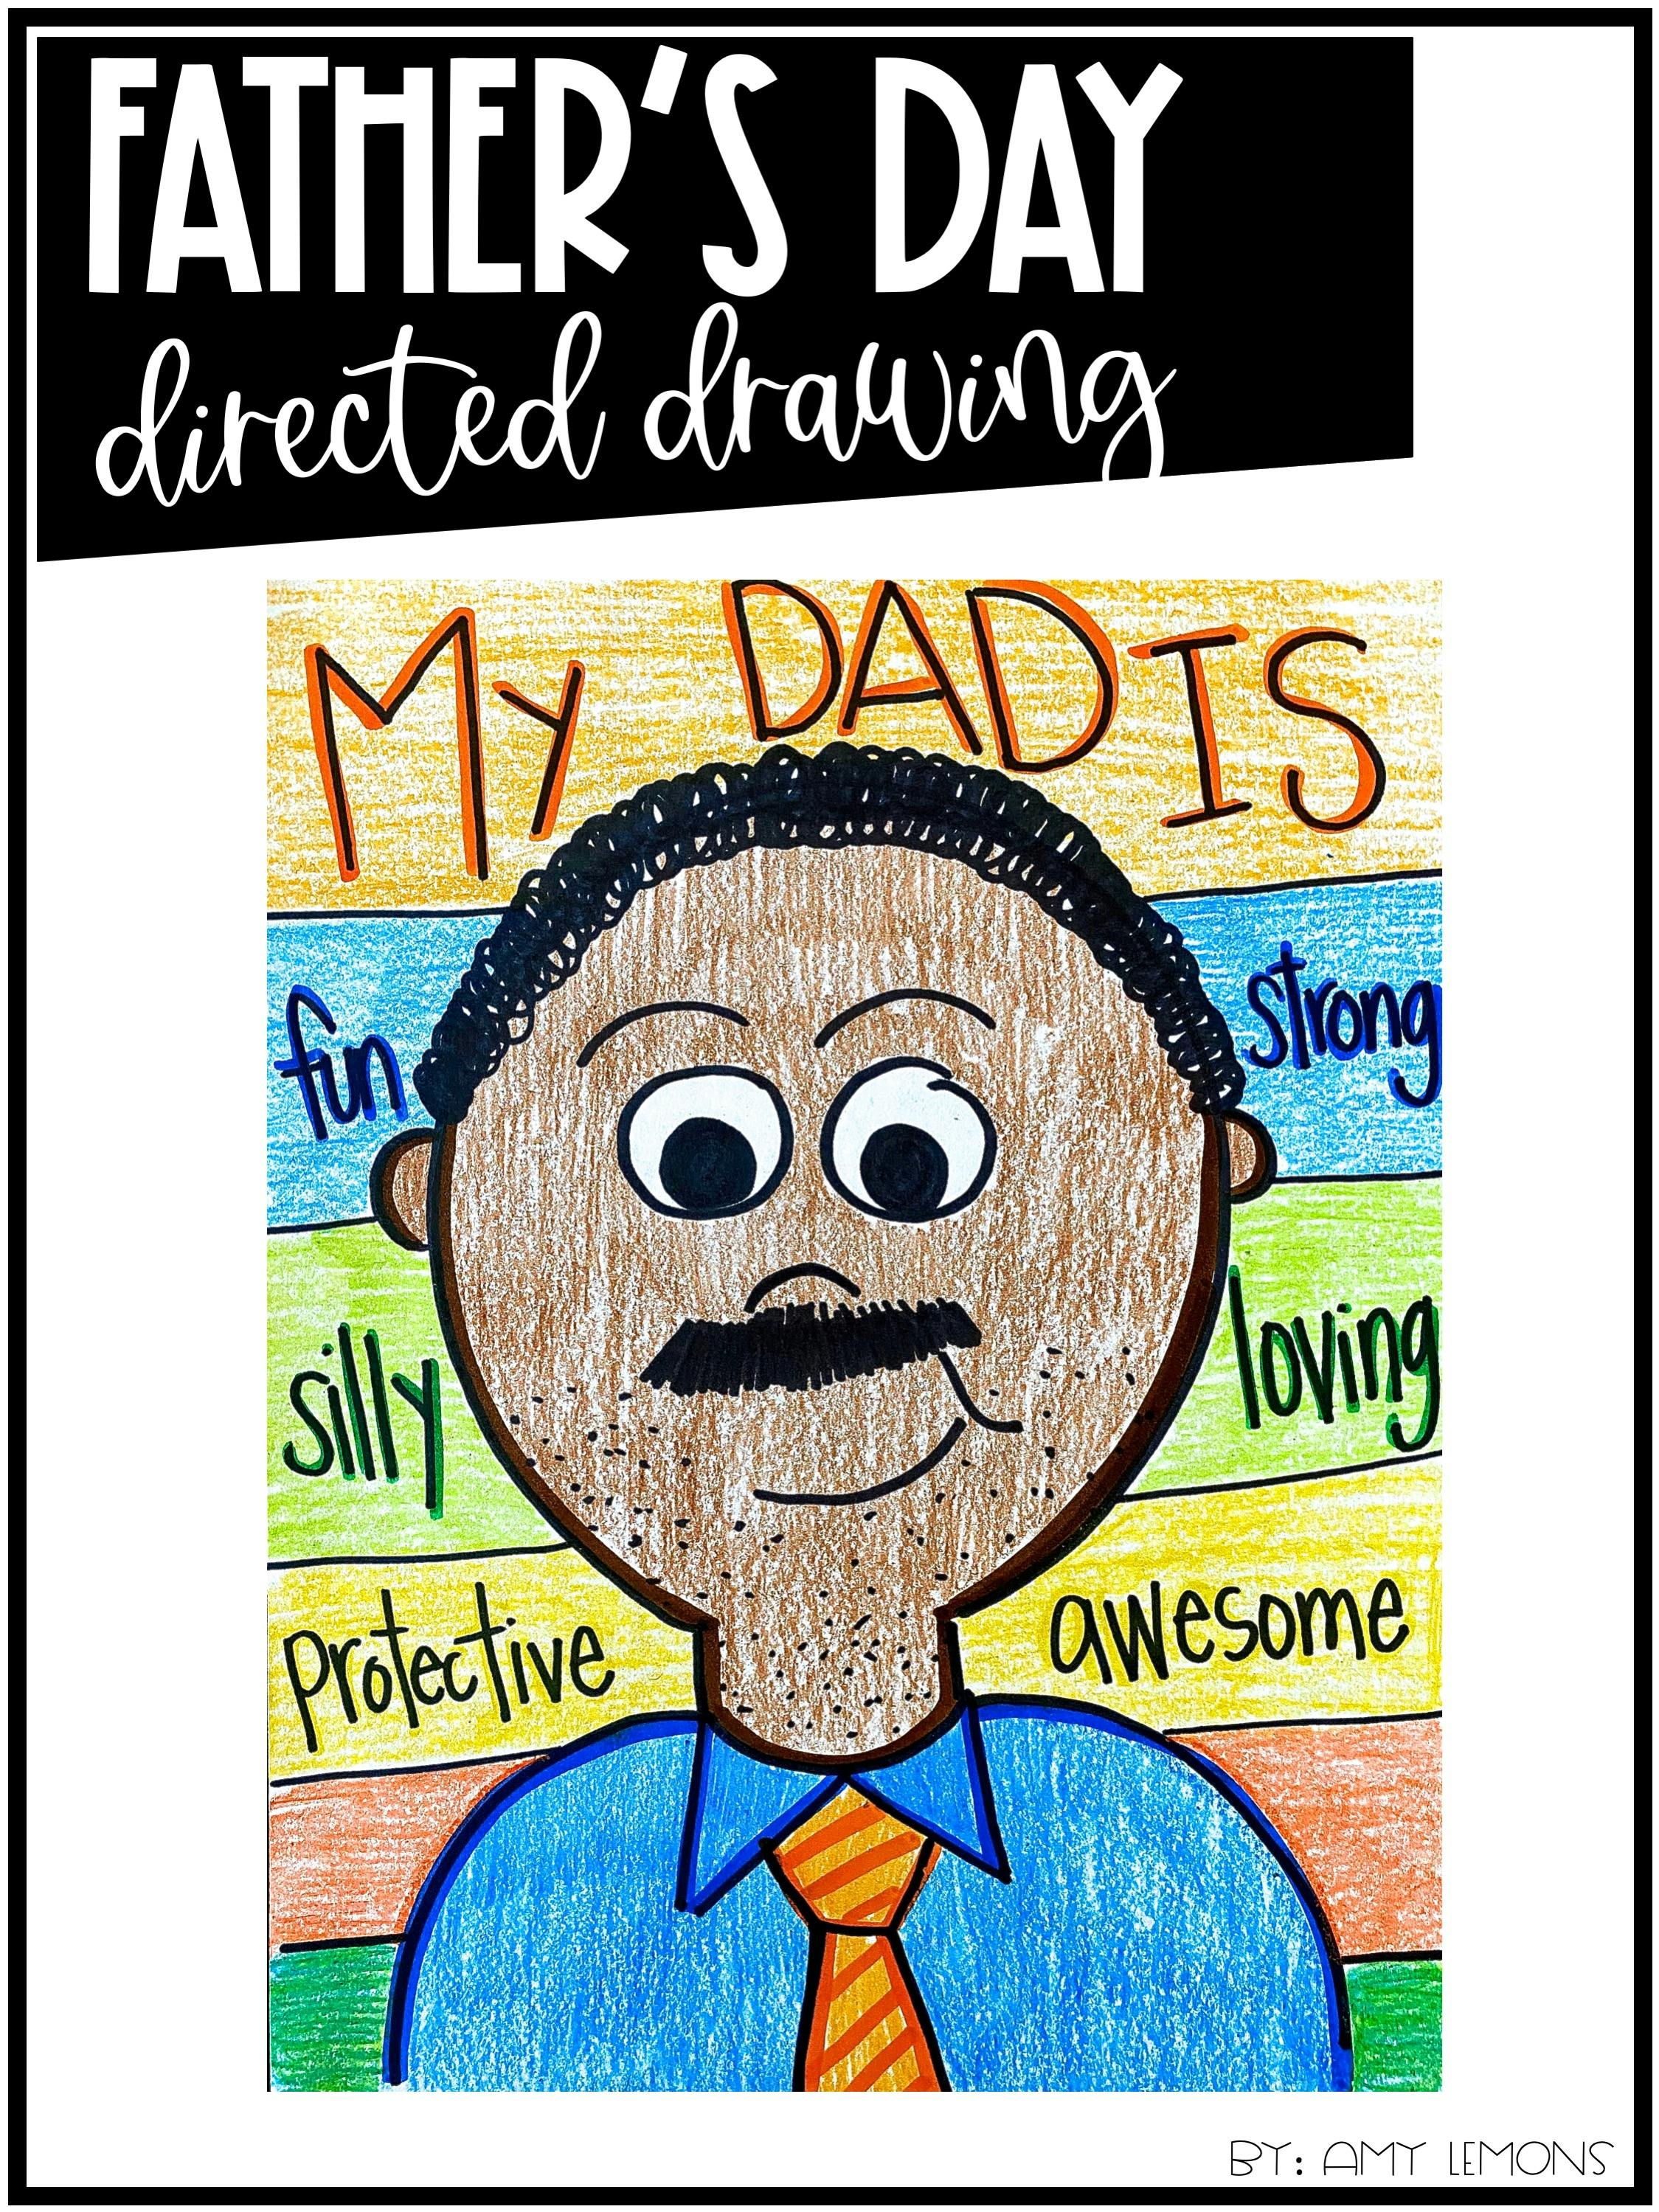 Father's Day Directed Drawing Amy Lemons